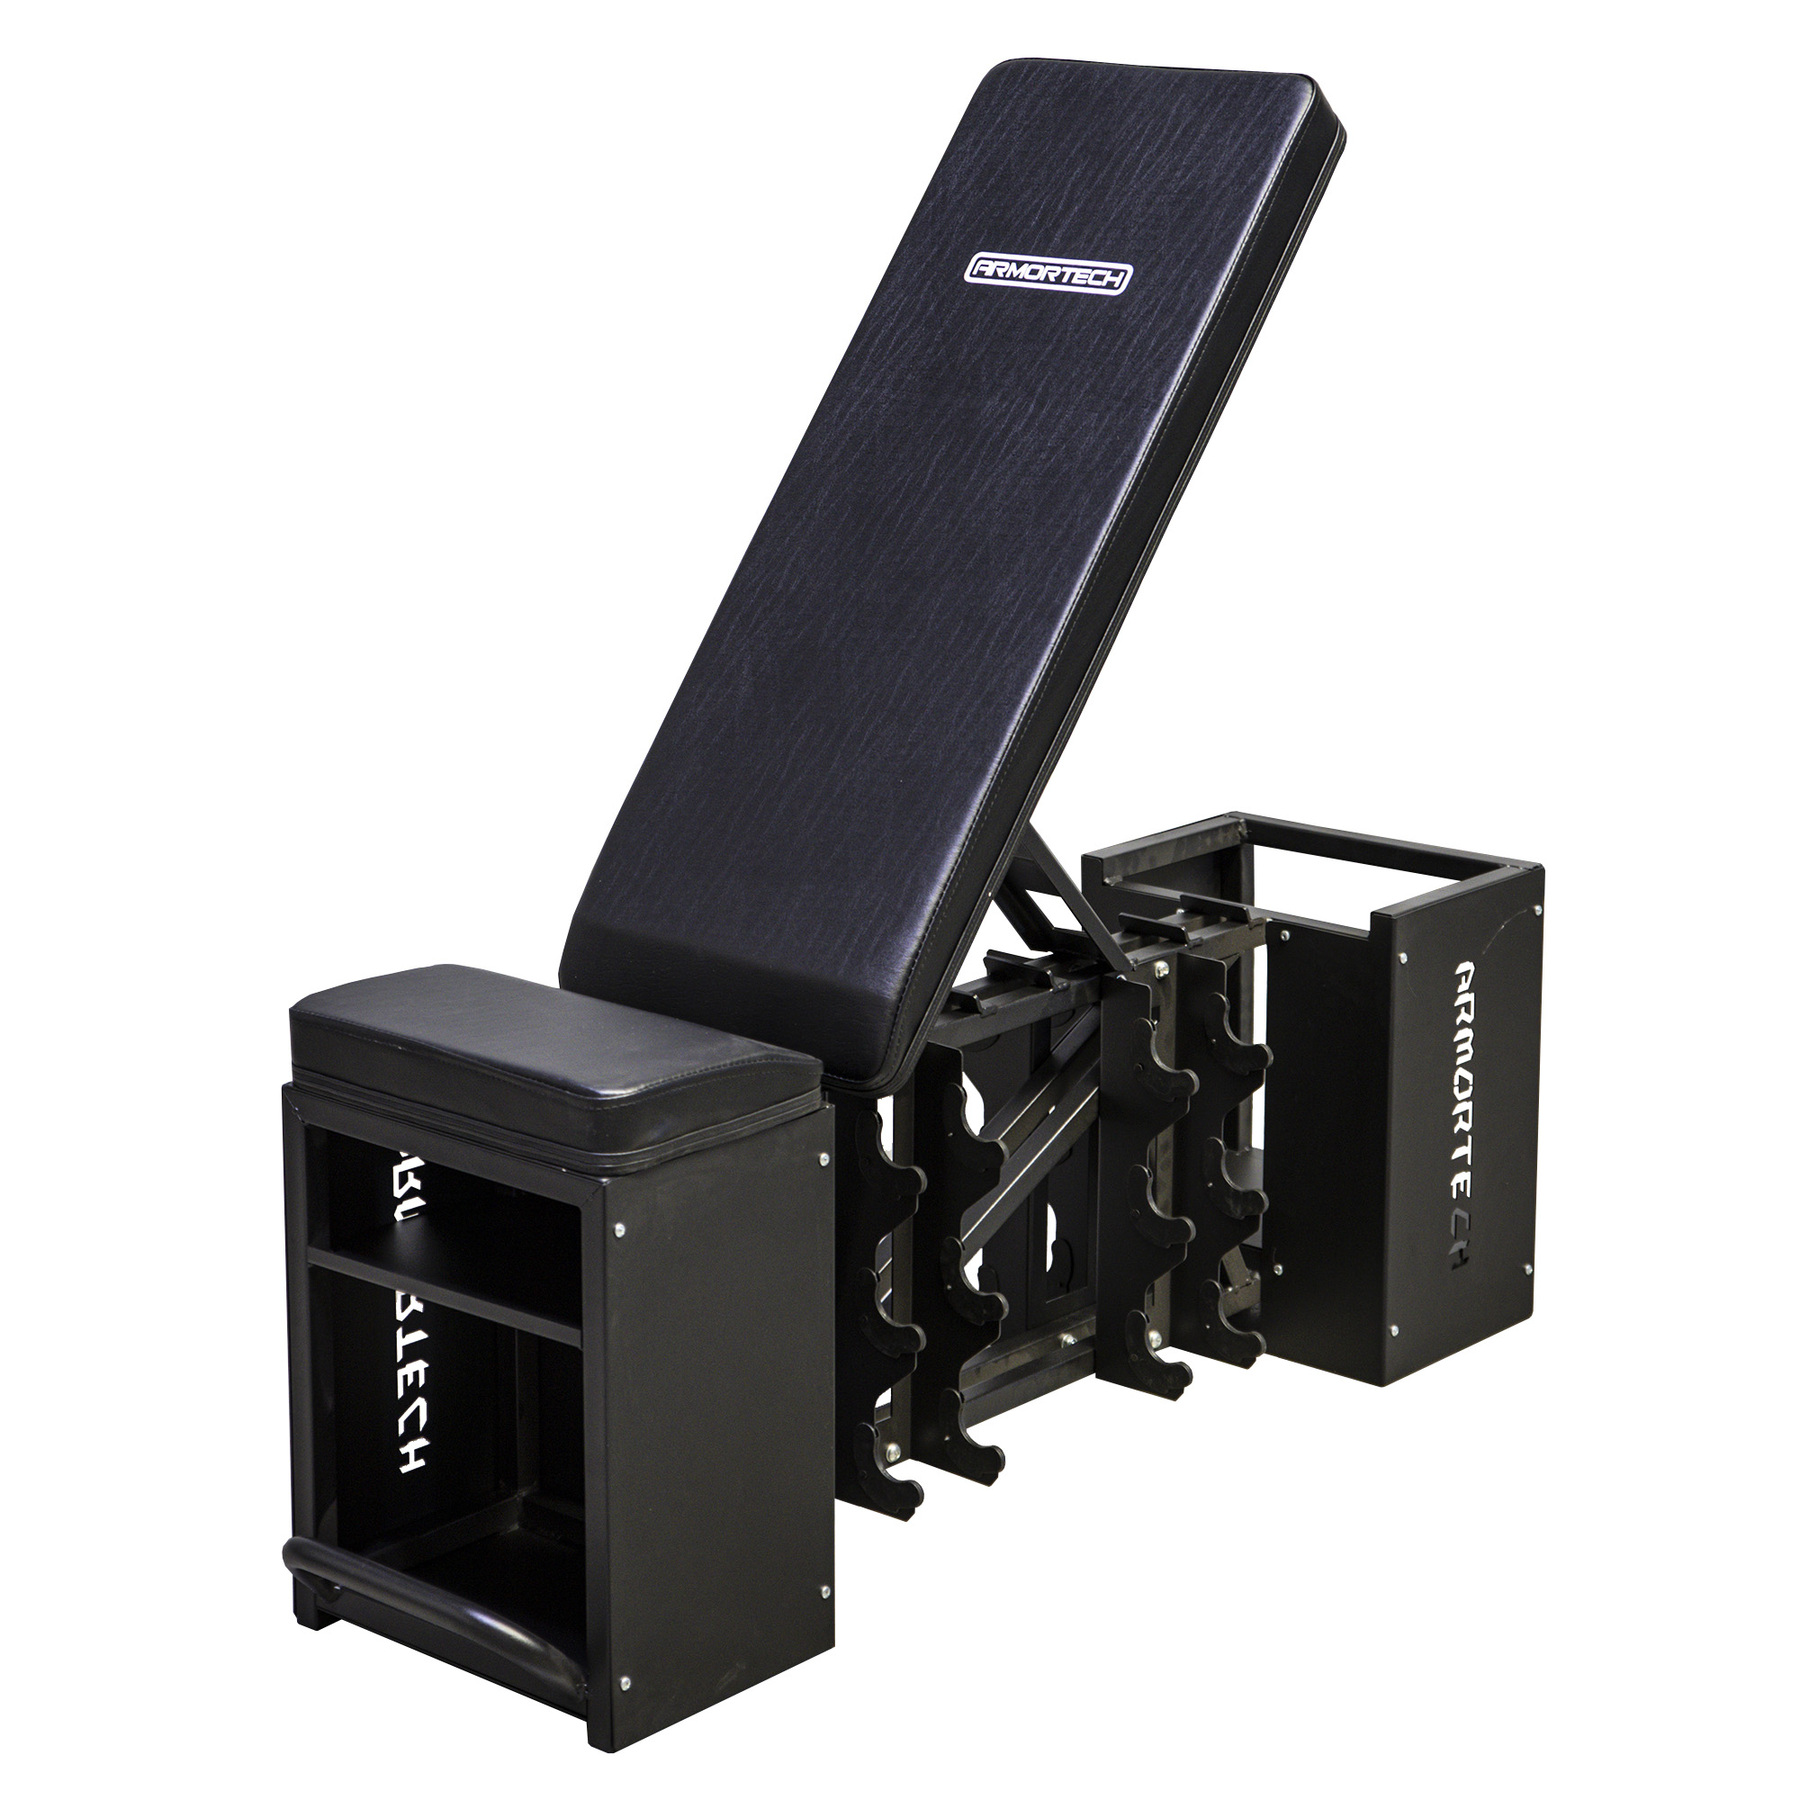 Armortech S10 Elite All In One Fit Bench